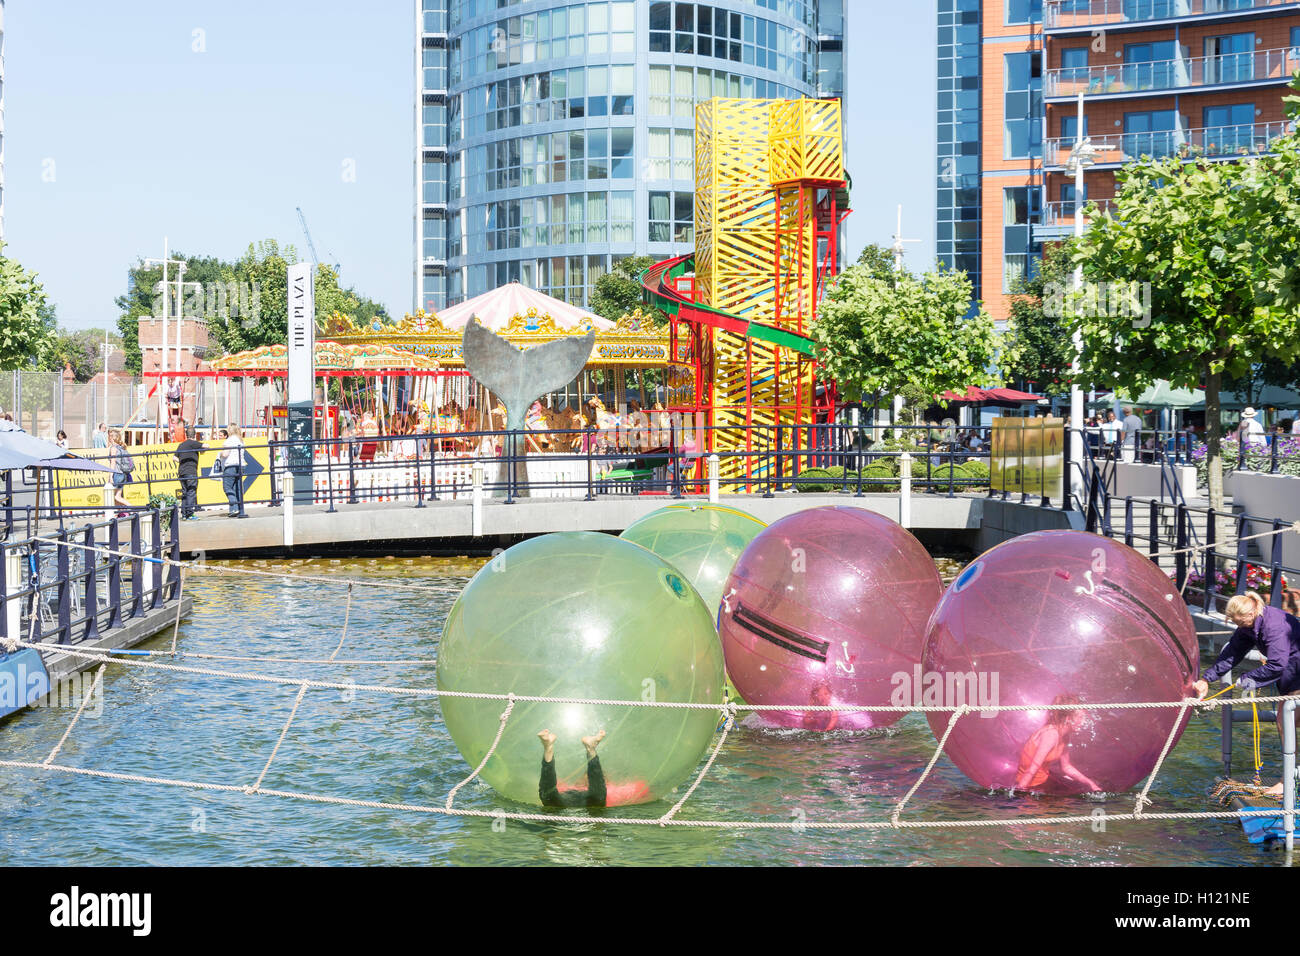 Children water balling at The Plaza, Gunwharf Quays, Portsmouth Harbour, Portsmouth, Hampshire, England, United Kingdom Stock Photo